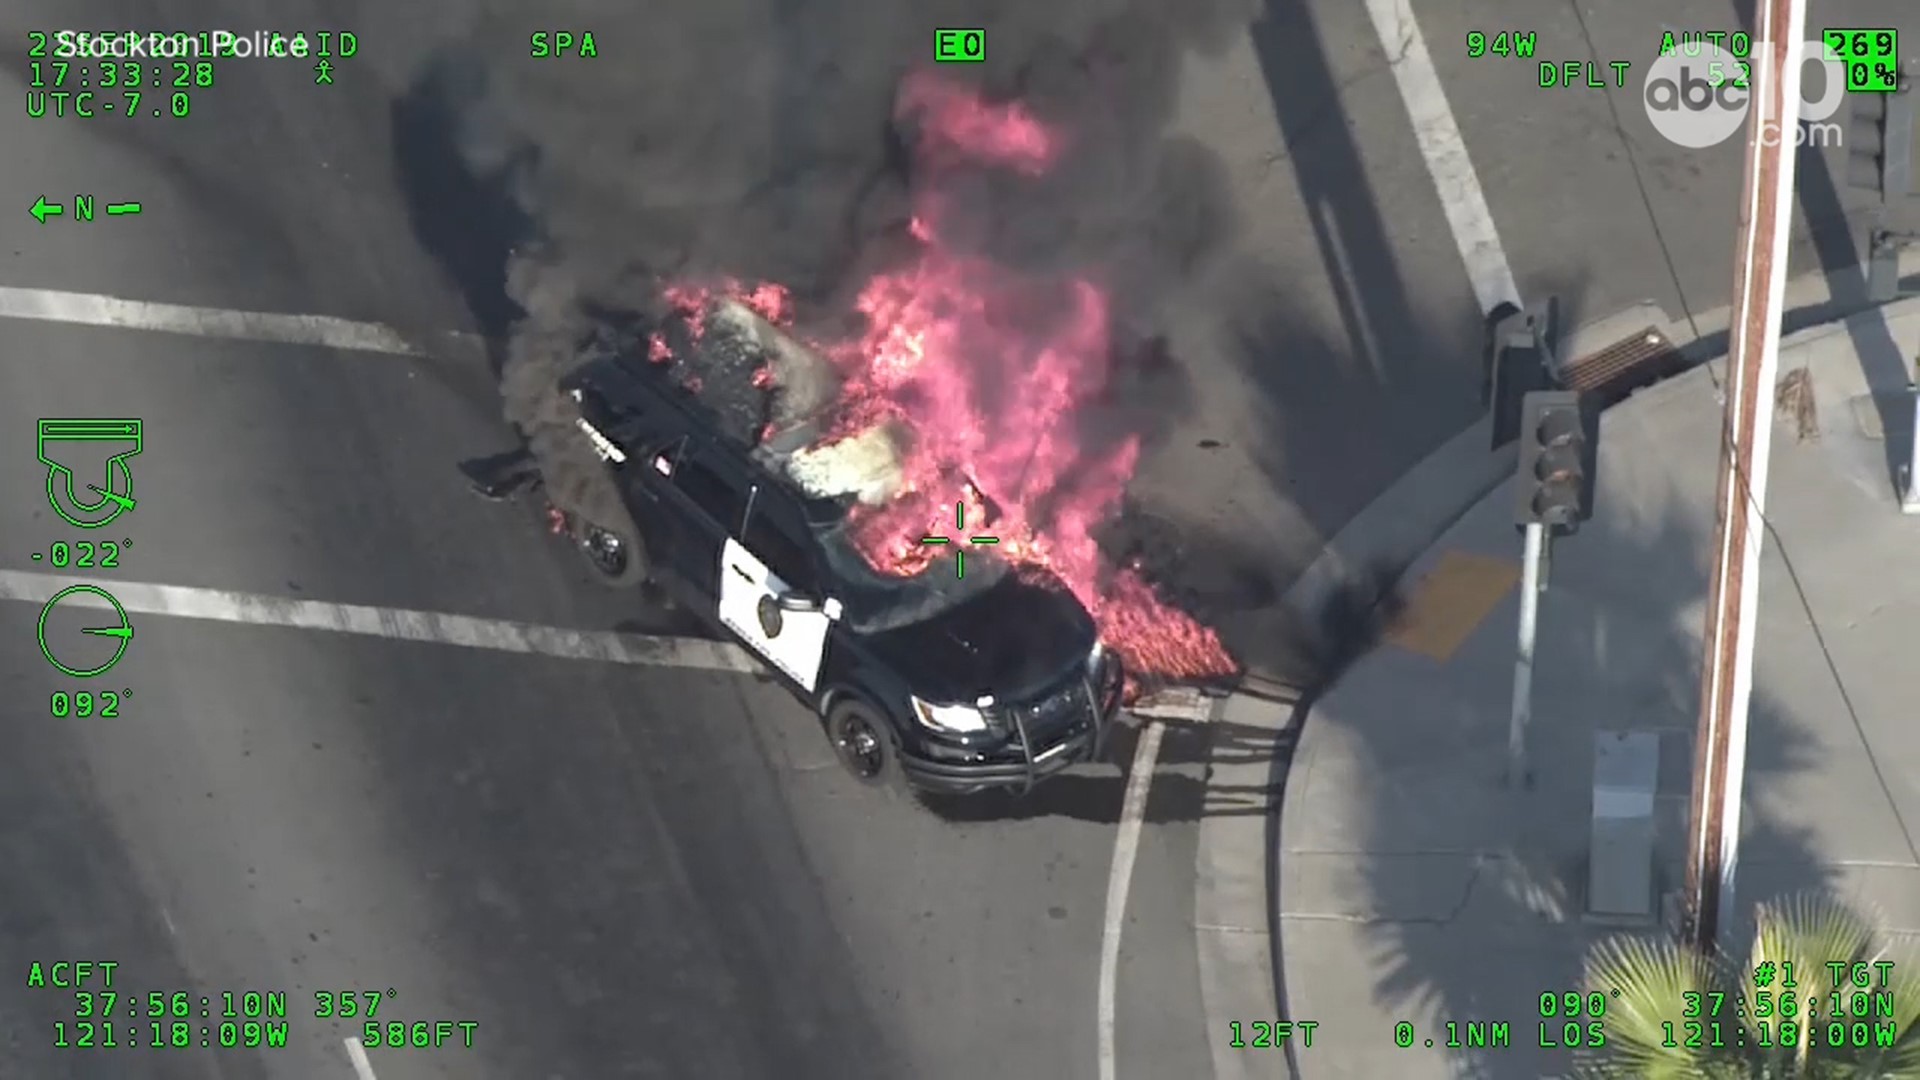 Stockton Police released video of a pursuit on September 22, 2019, of suspected gang members. The pursuit ended with a crash and a patrol vehicle on fire.